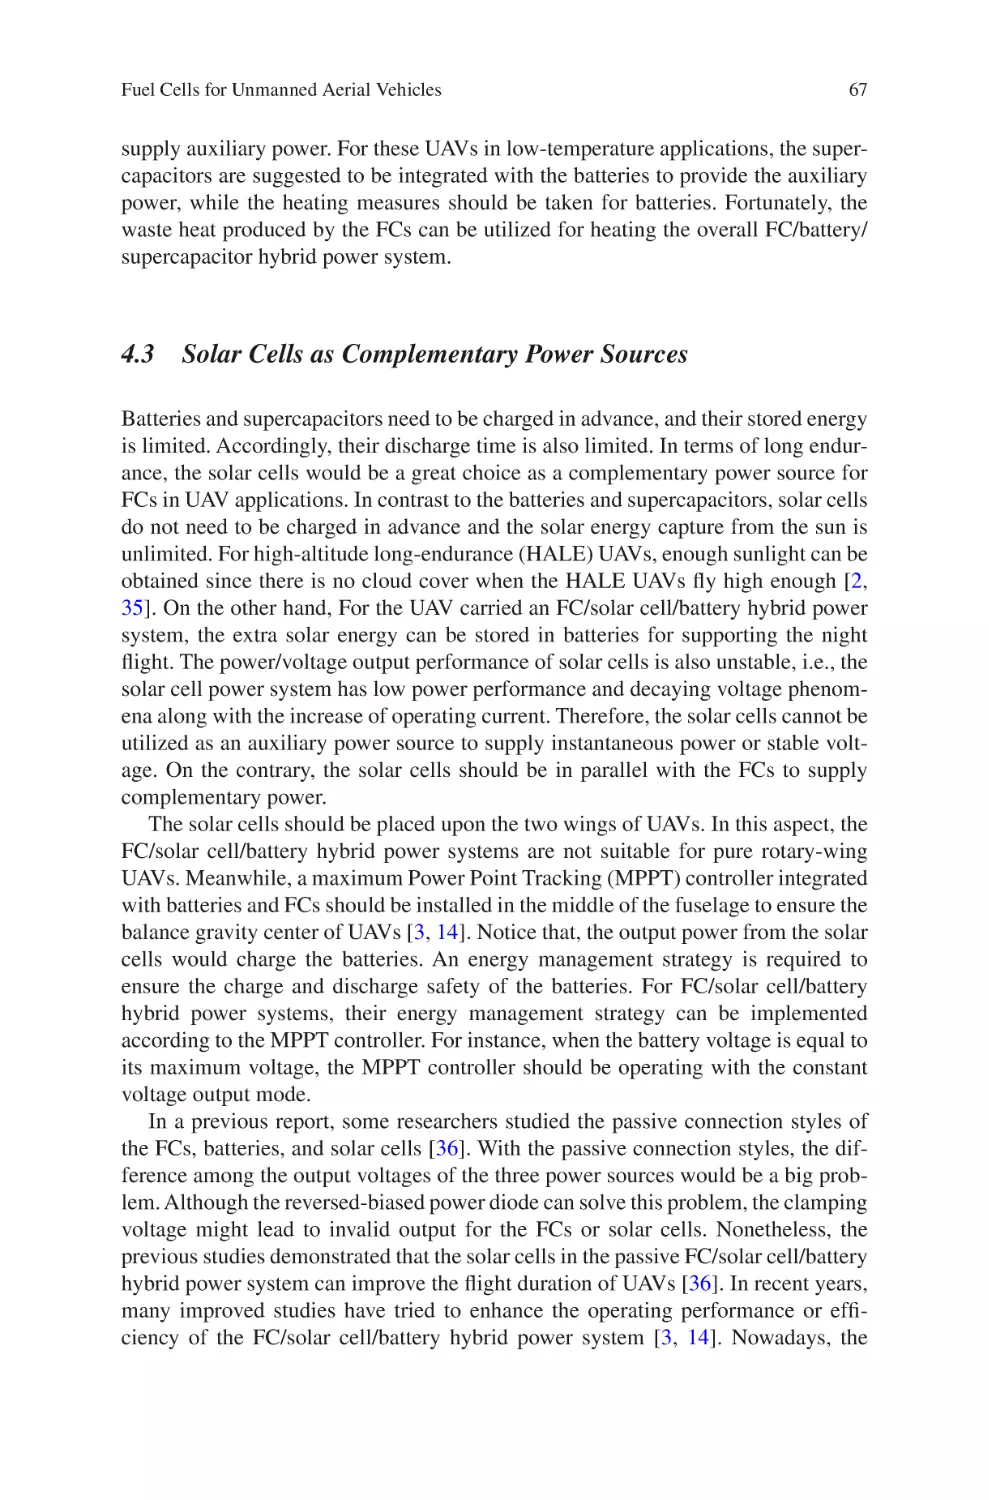 4.3 Solar Cells as Complementary Power Sources